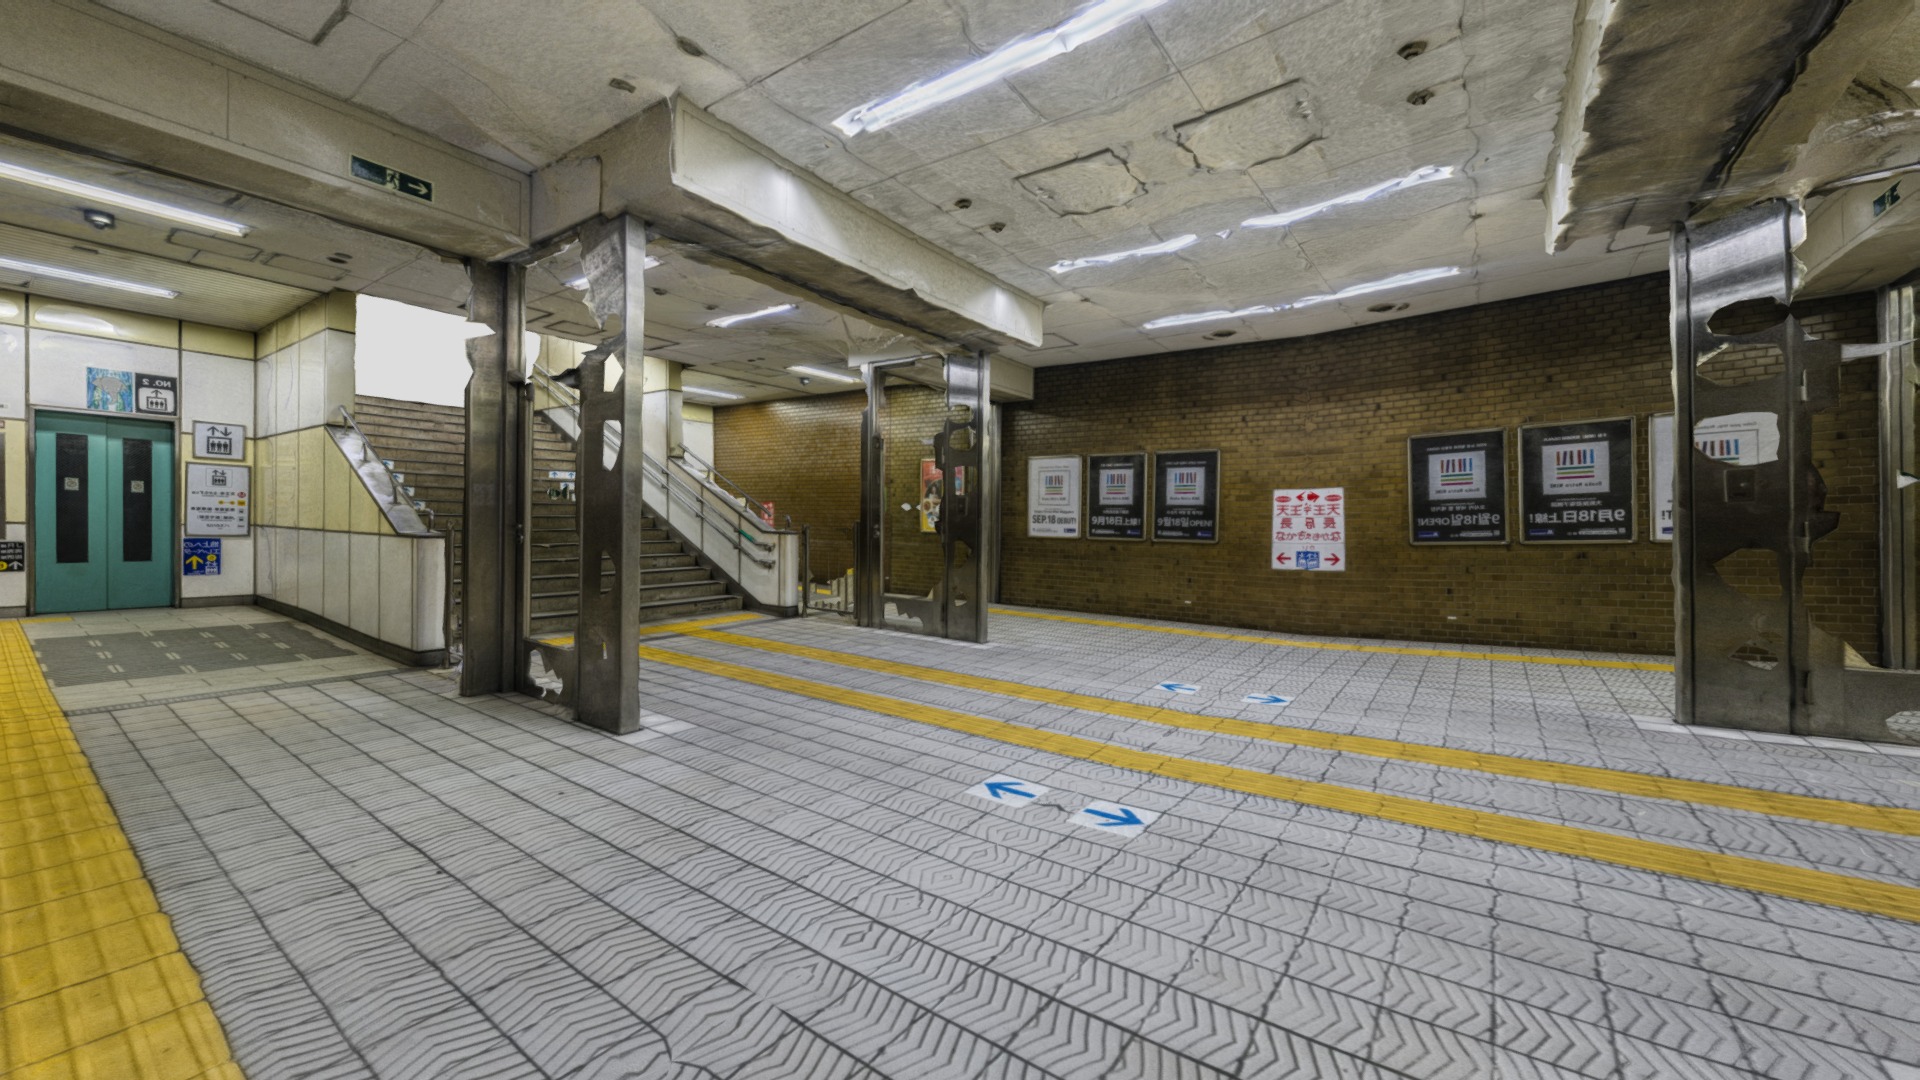 3D model Osaka Subway station double photogrammetry scan - This is a 3D model of the Osaka Subway station double photogrammetry scan. The 3D model is about a subway station with a few doors.